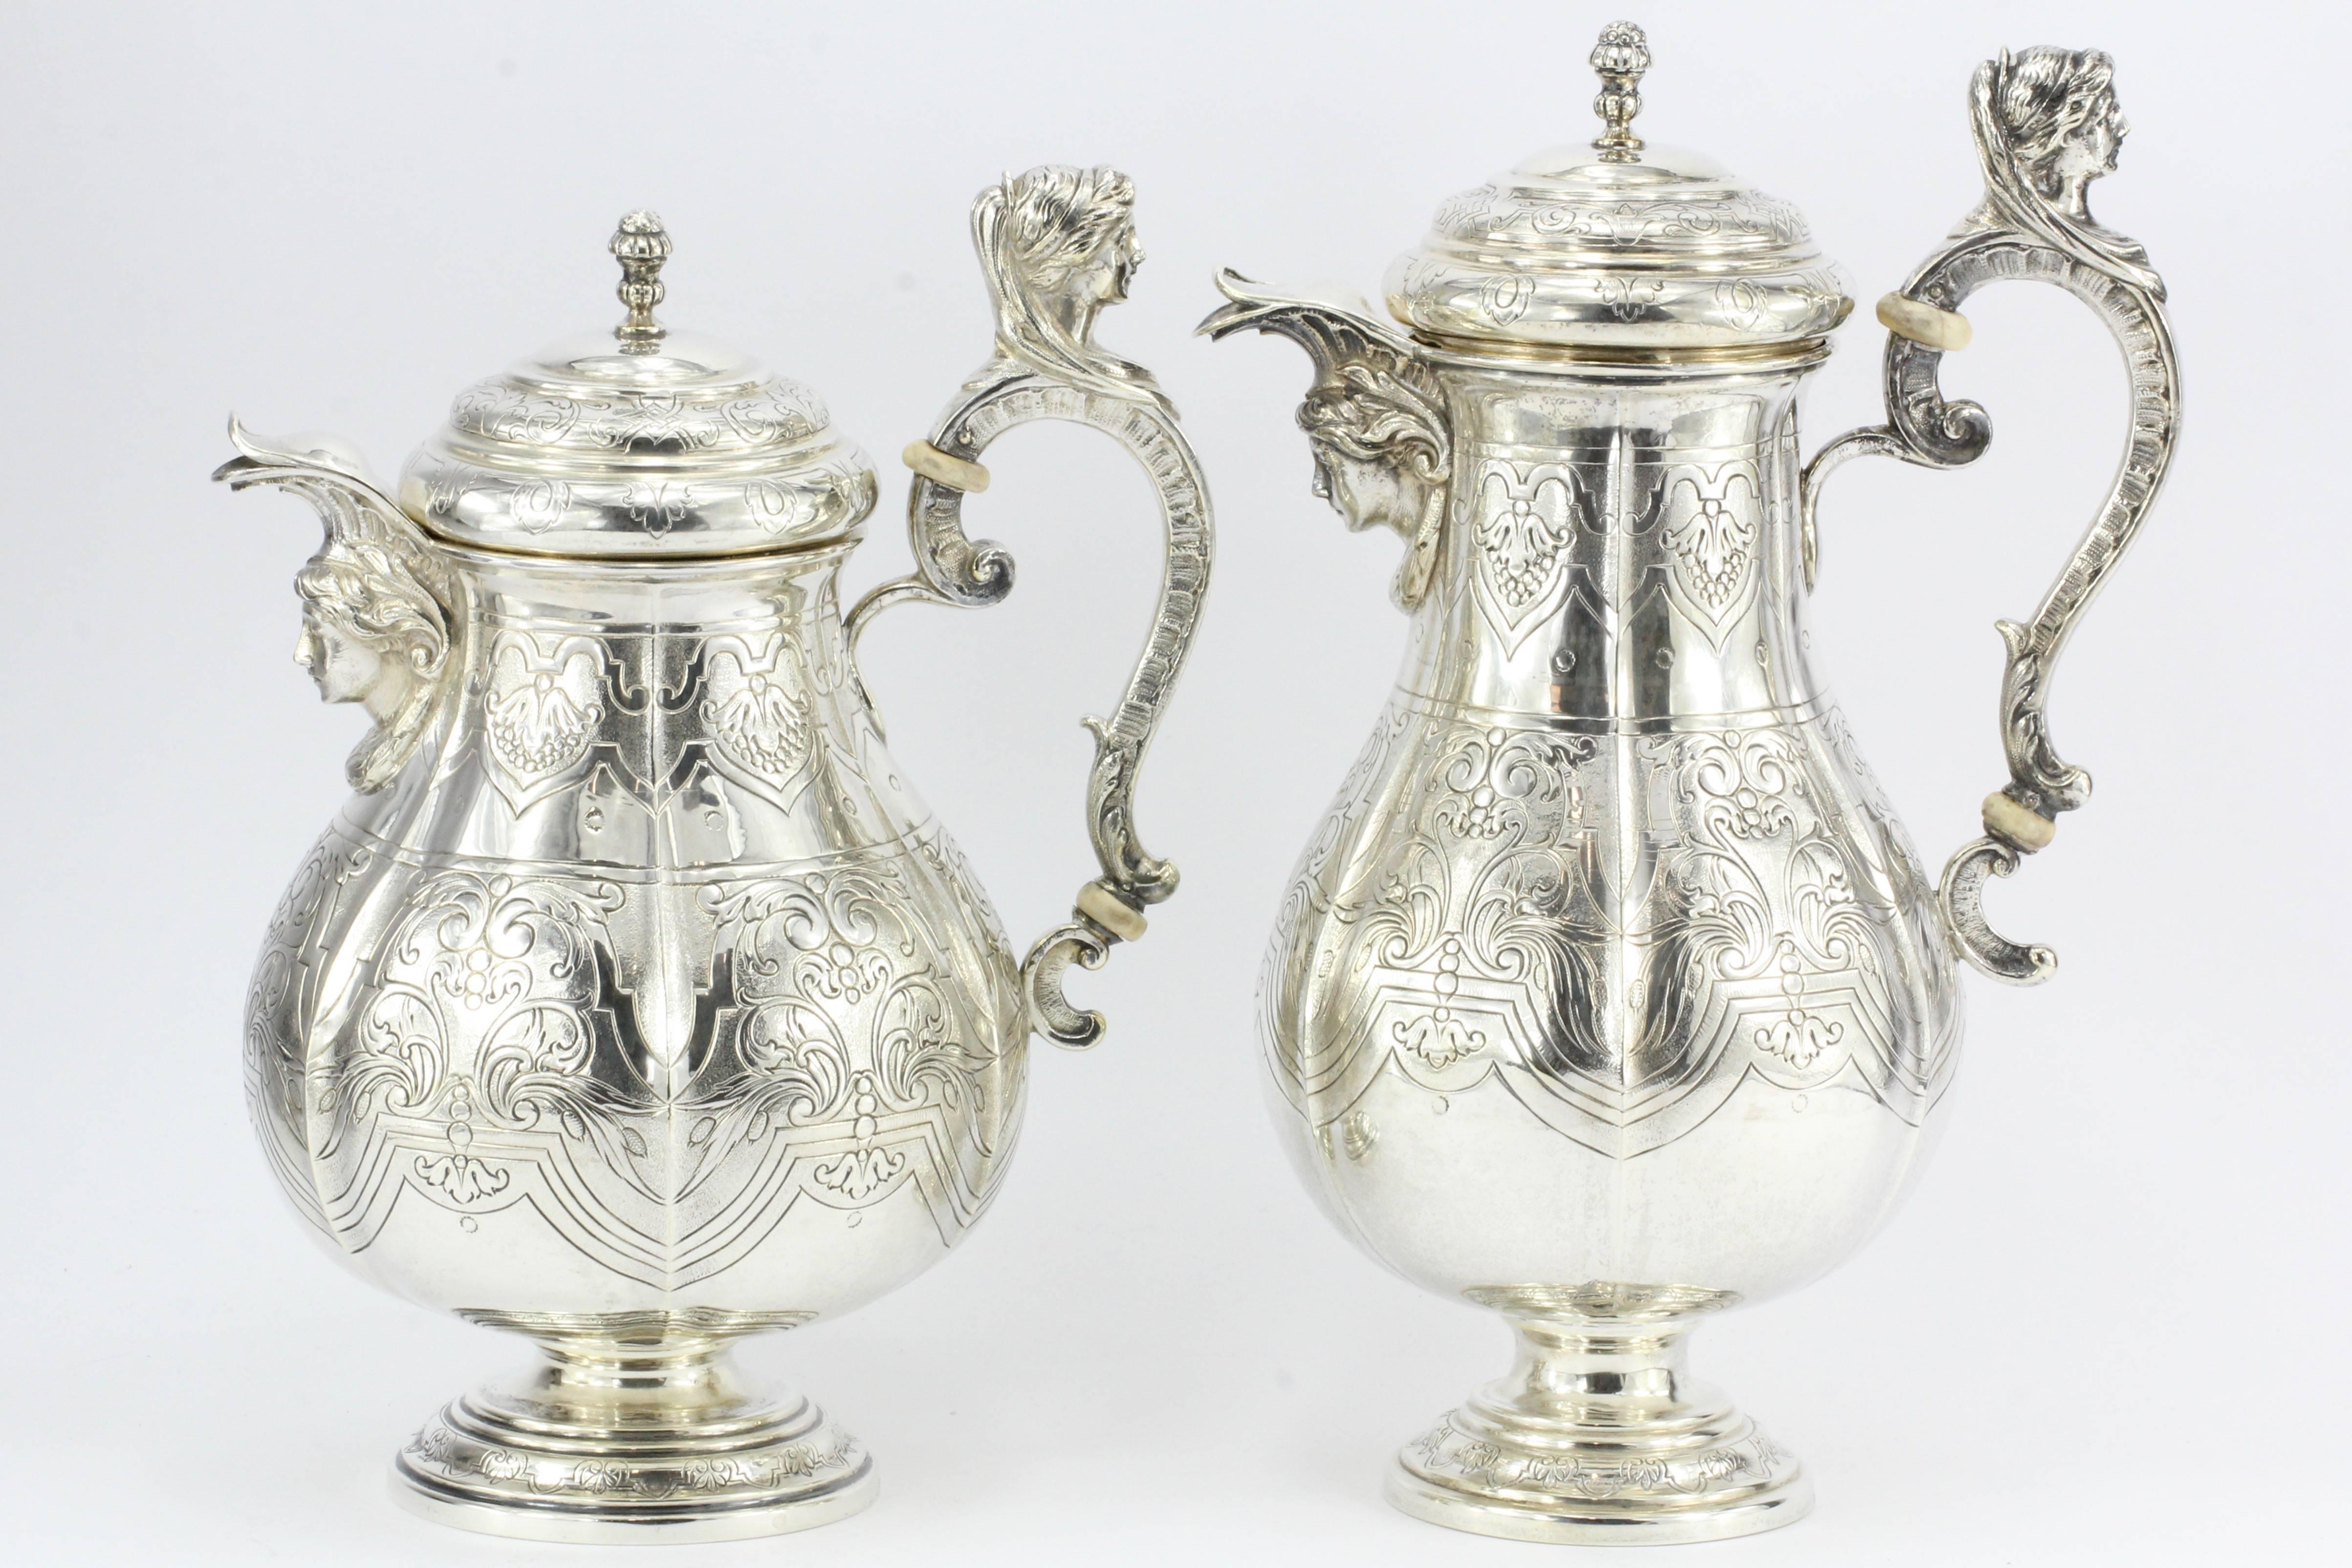 Antique Georg Roth Hanau German Silver Figural Revival Five-Piece Tea Set In Excellent Condition For Sale In Cape May, NJ